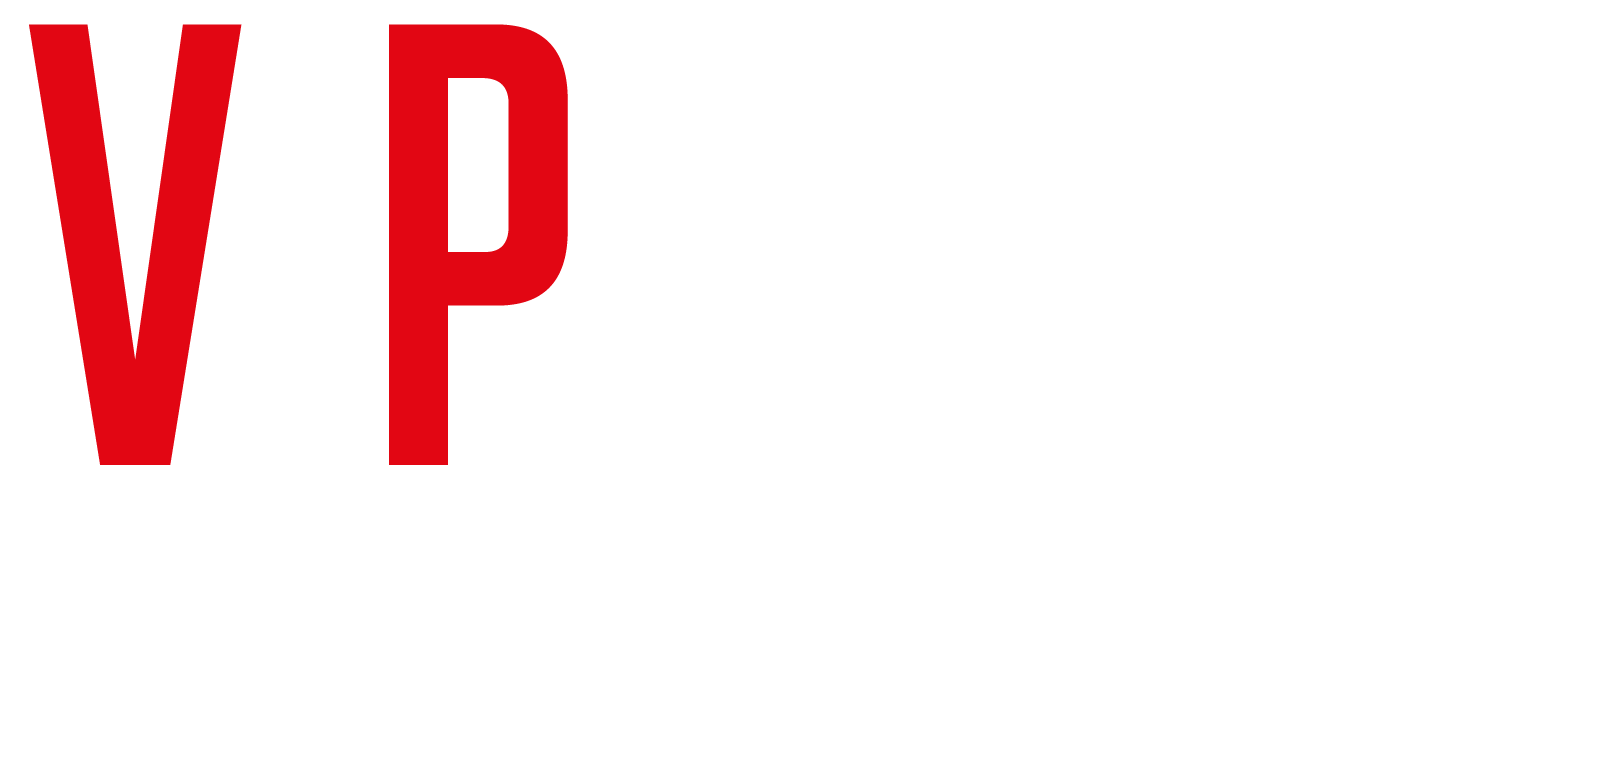 VIP Safety - designed to protect you